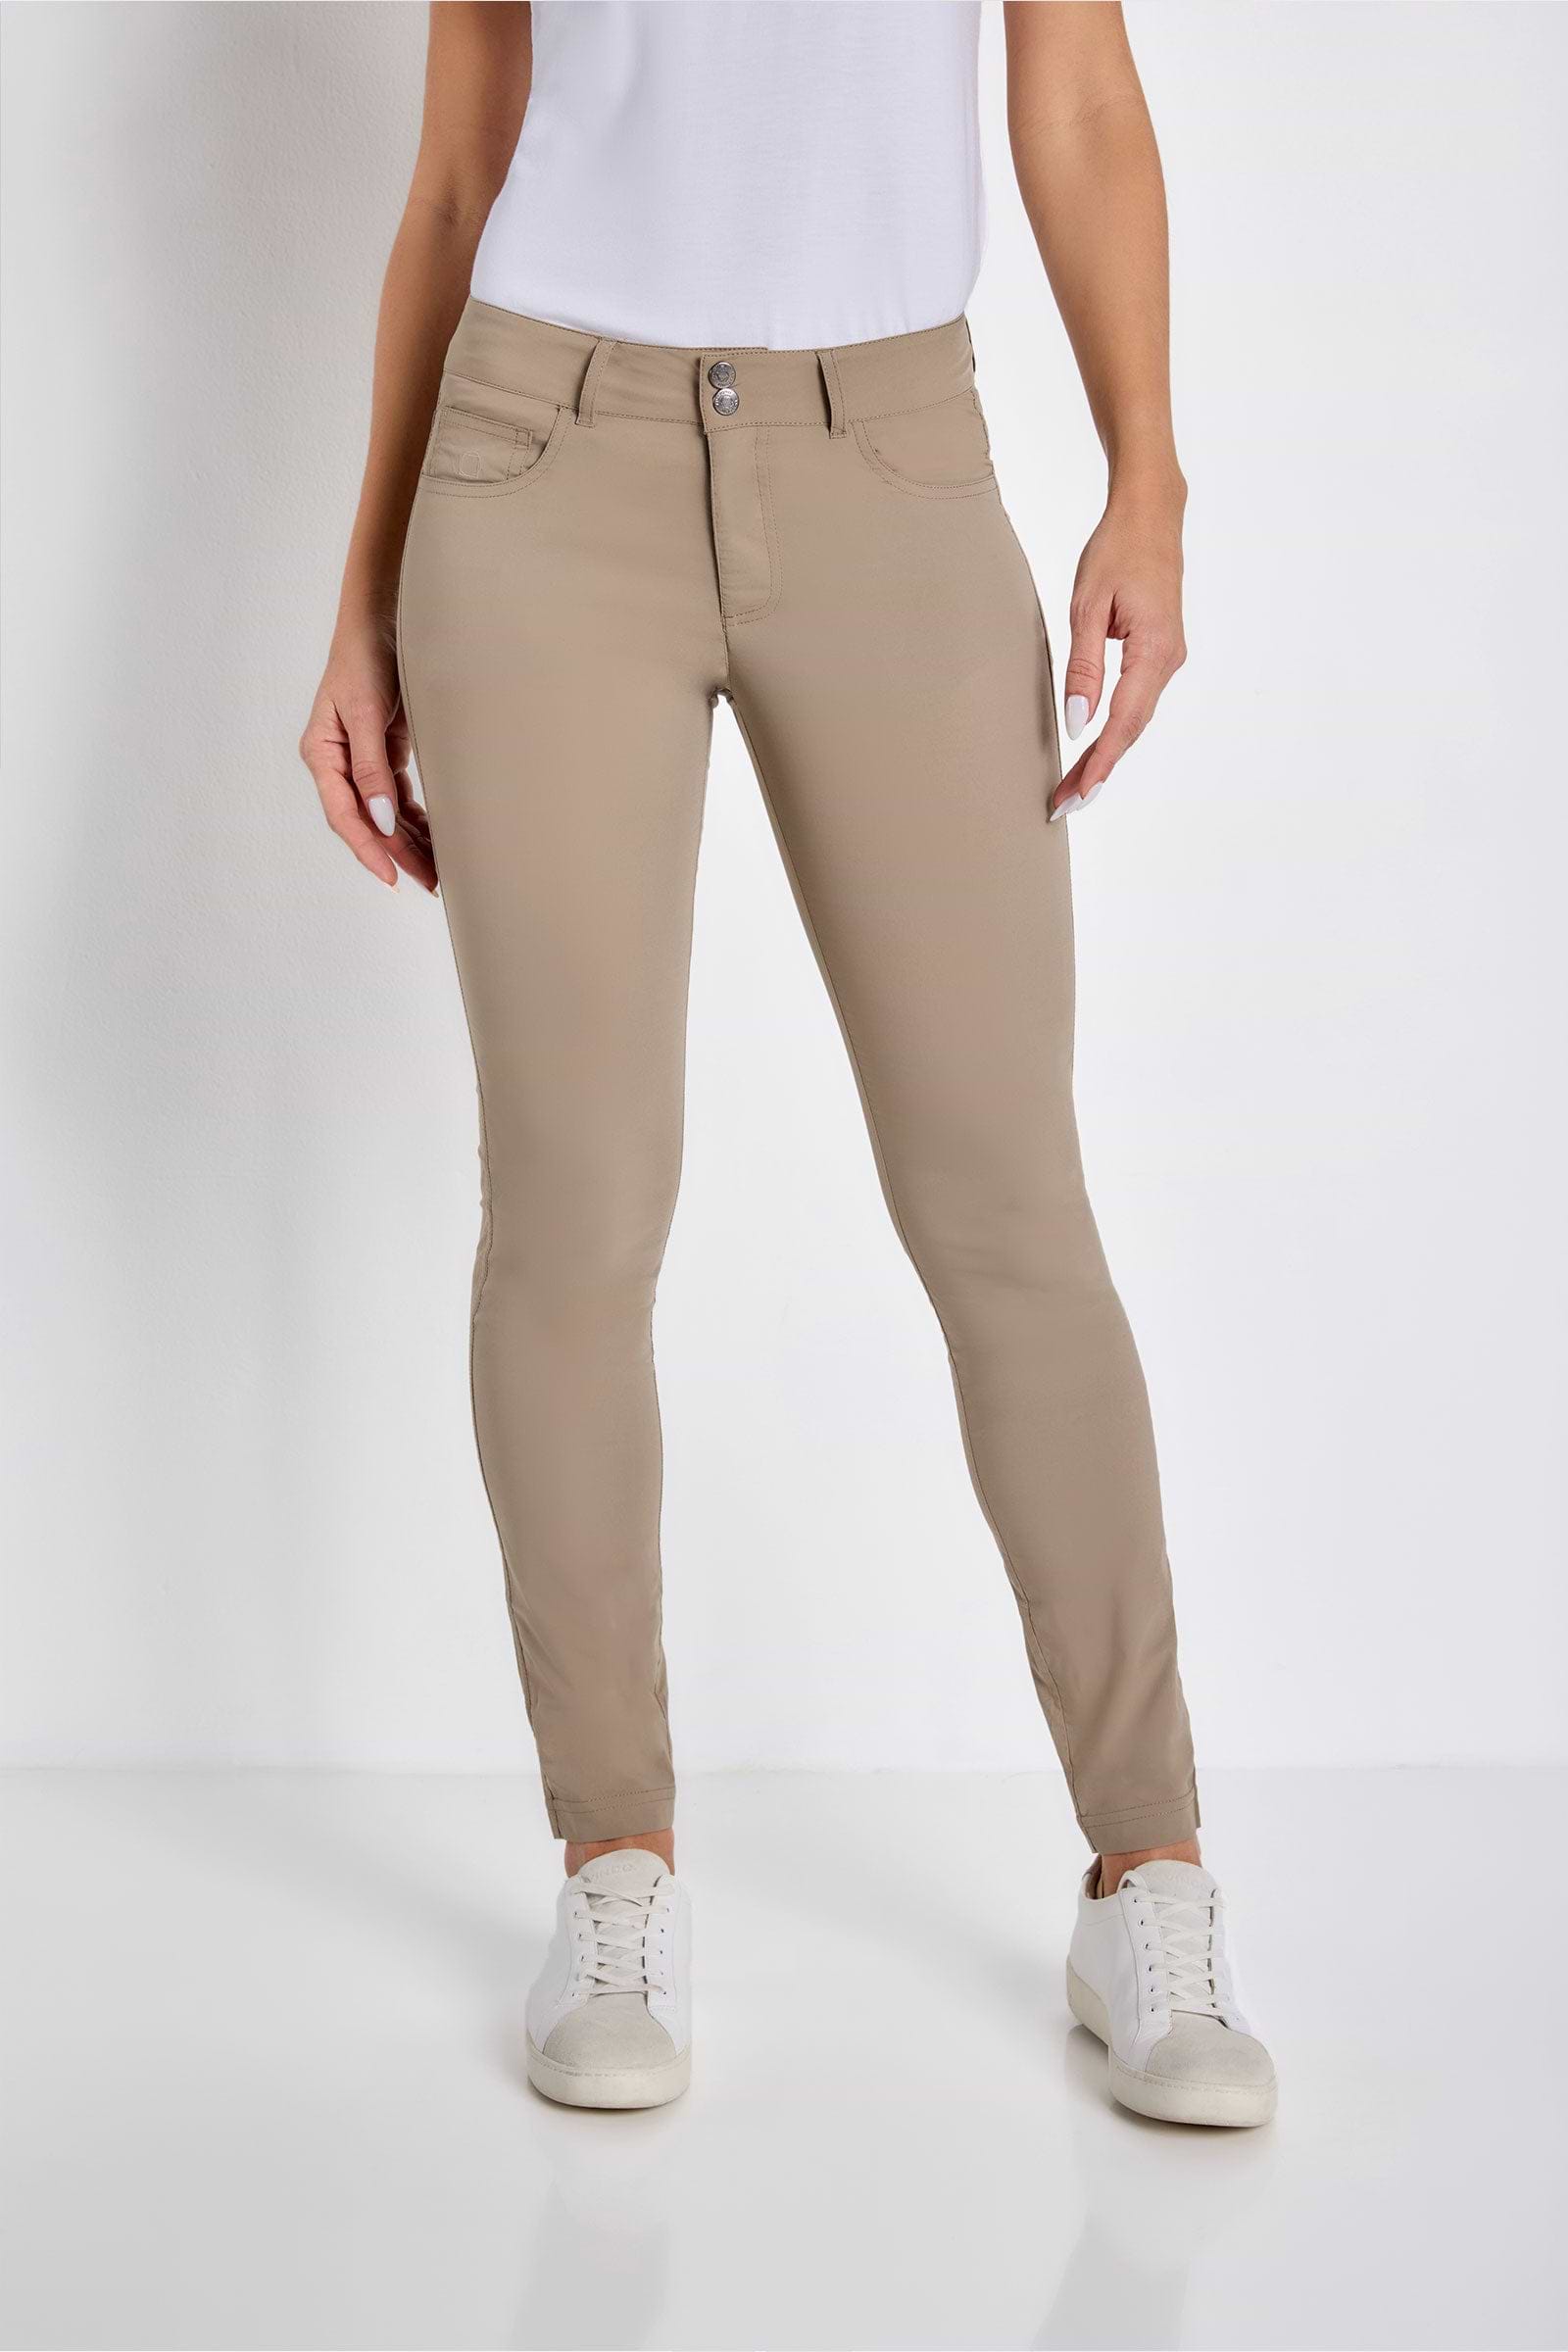 The Best Travel Pants. Front Profile of the Luisa Skinny Jean Pant in Khaki